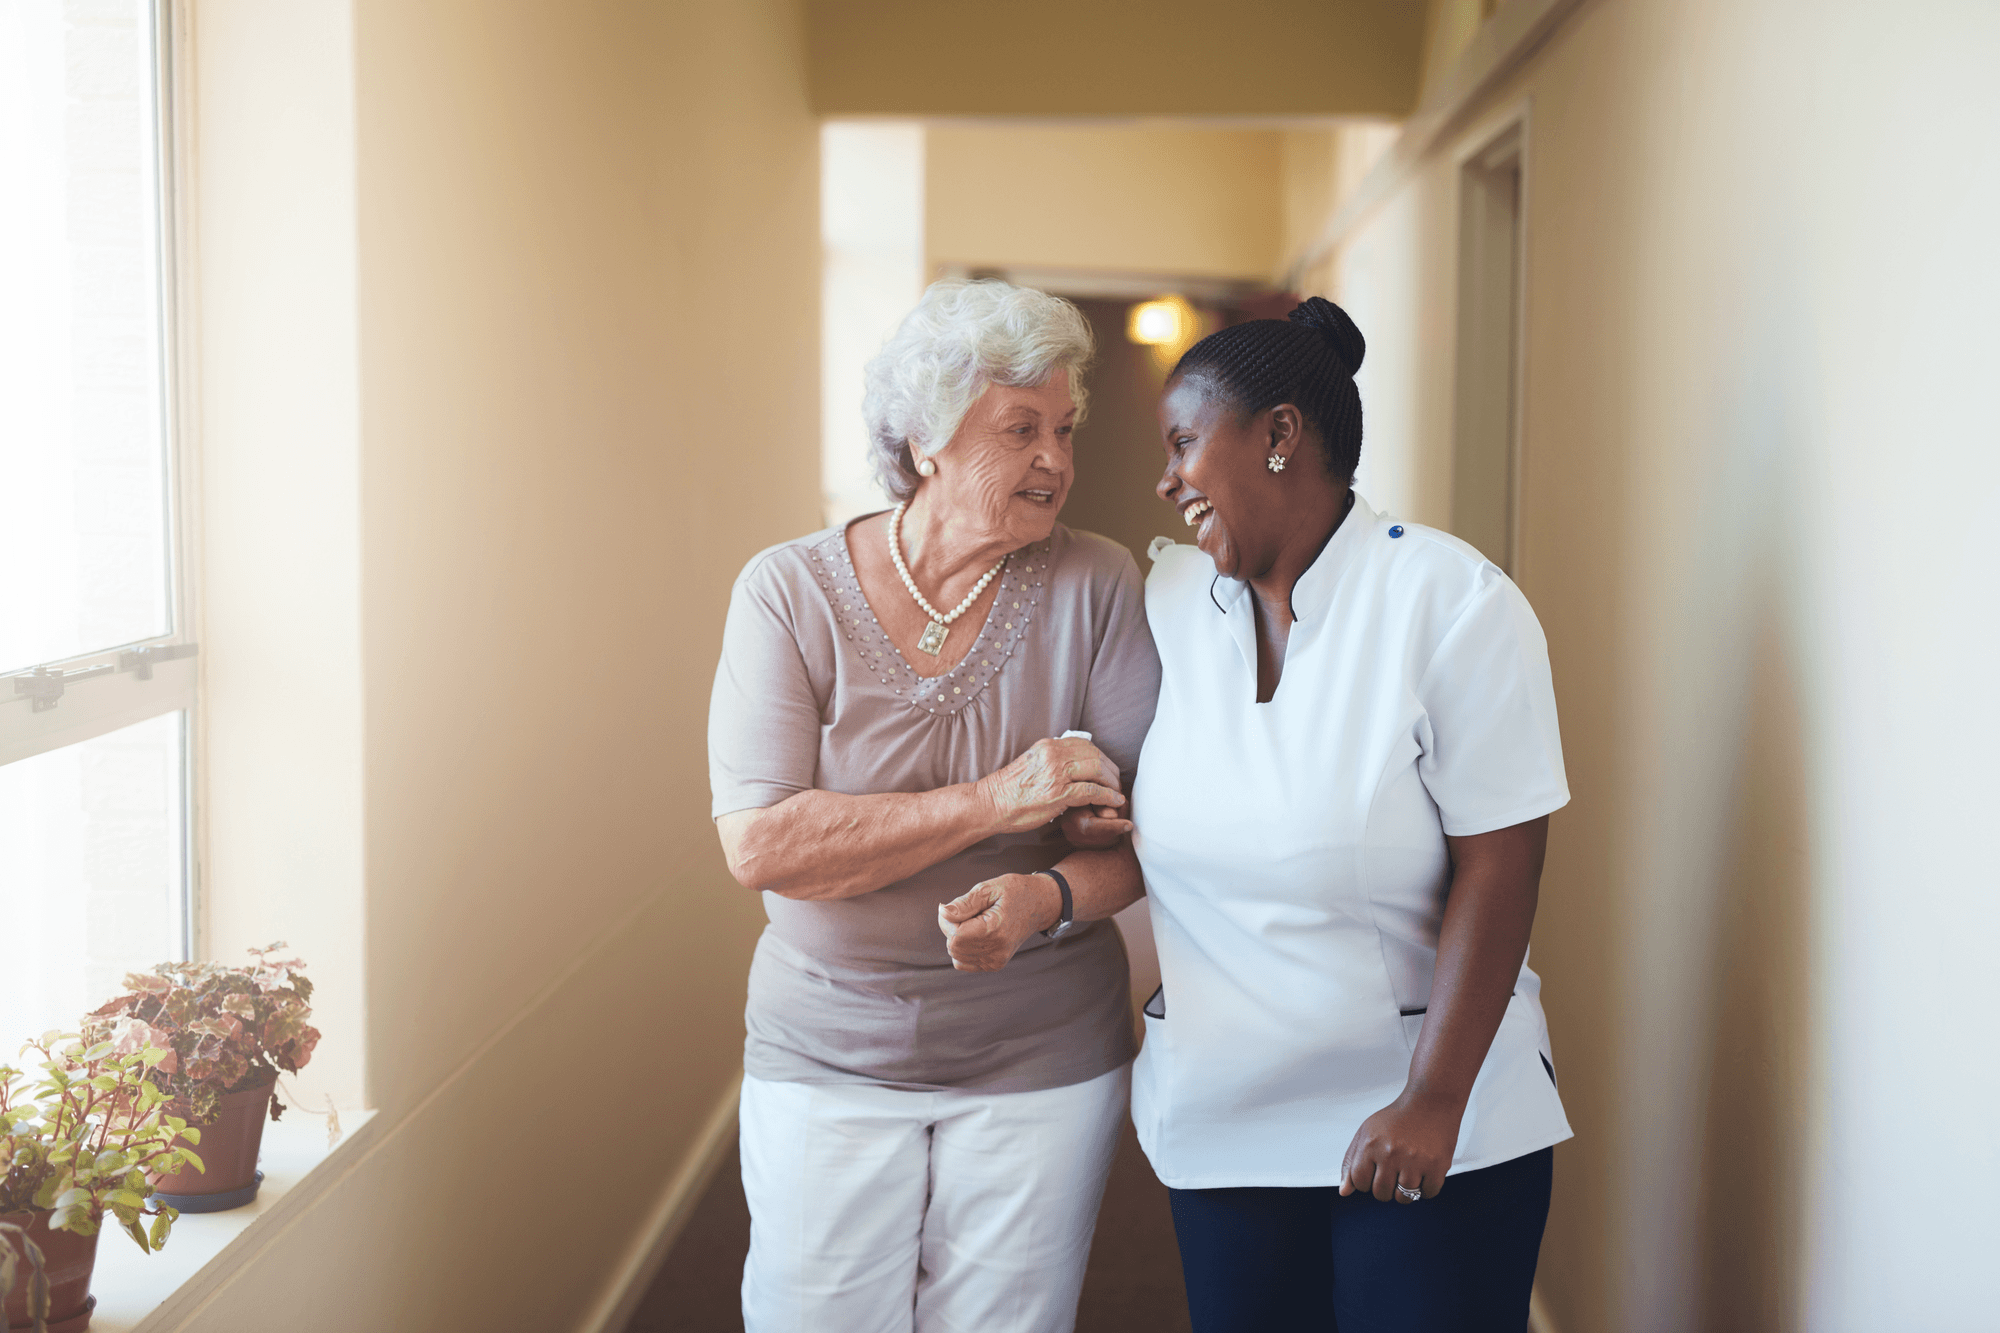 What Are The Benefits Of Being A Senior Caregiver?